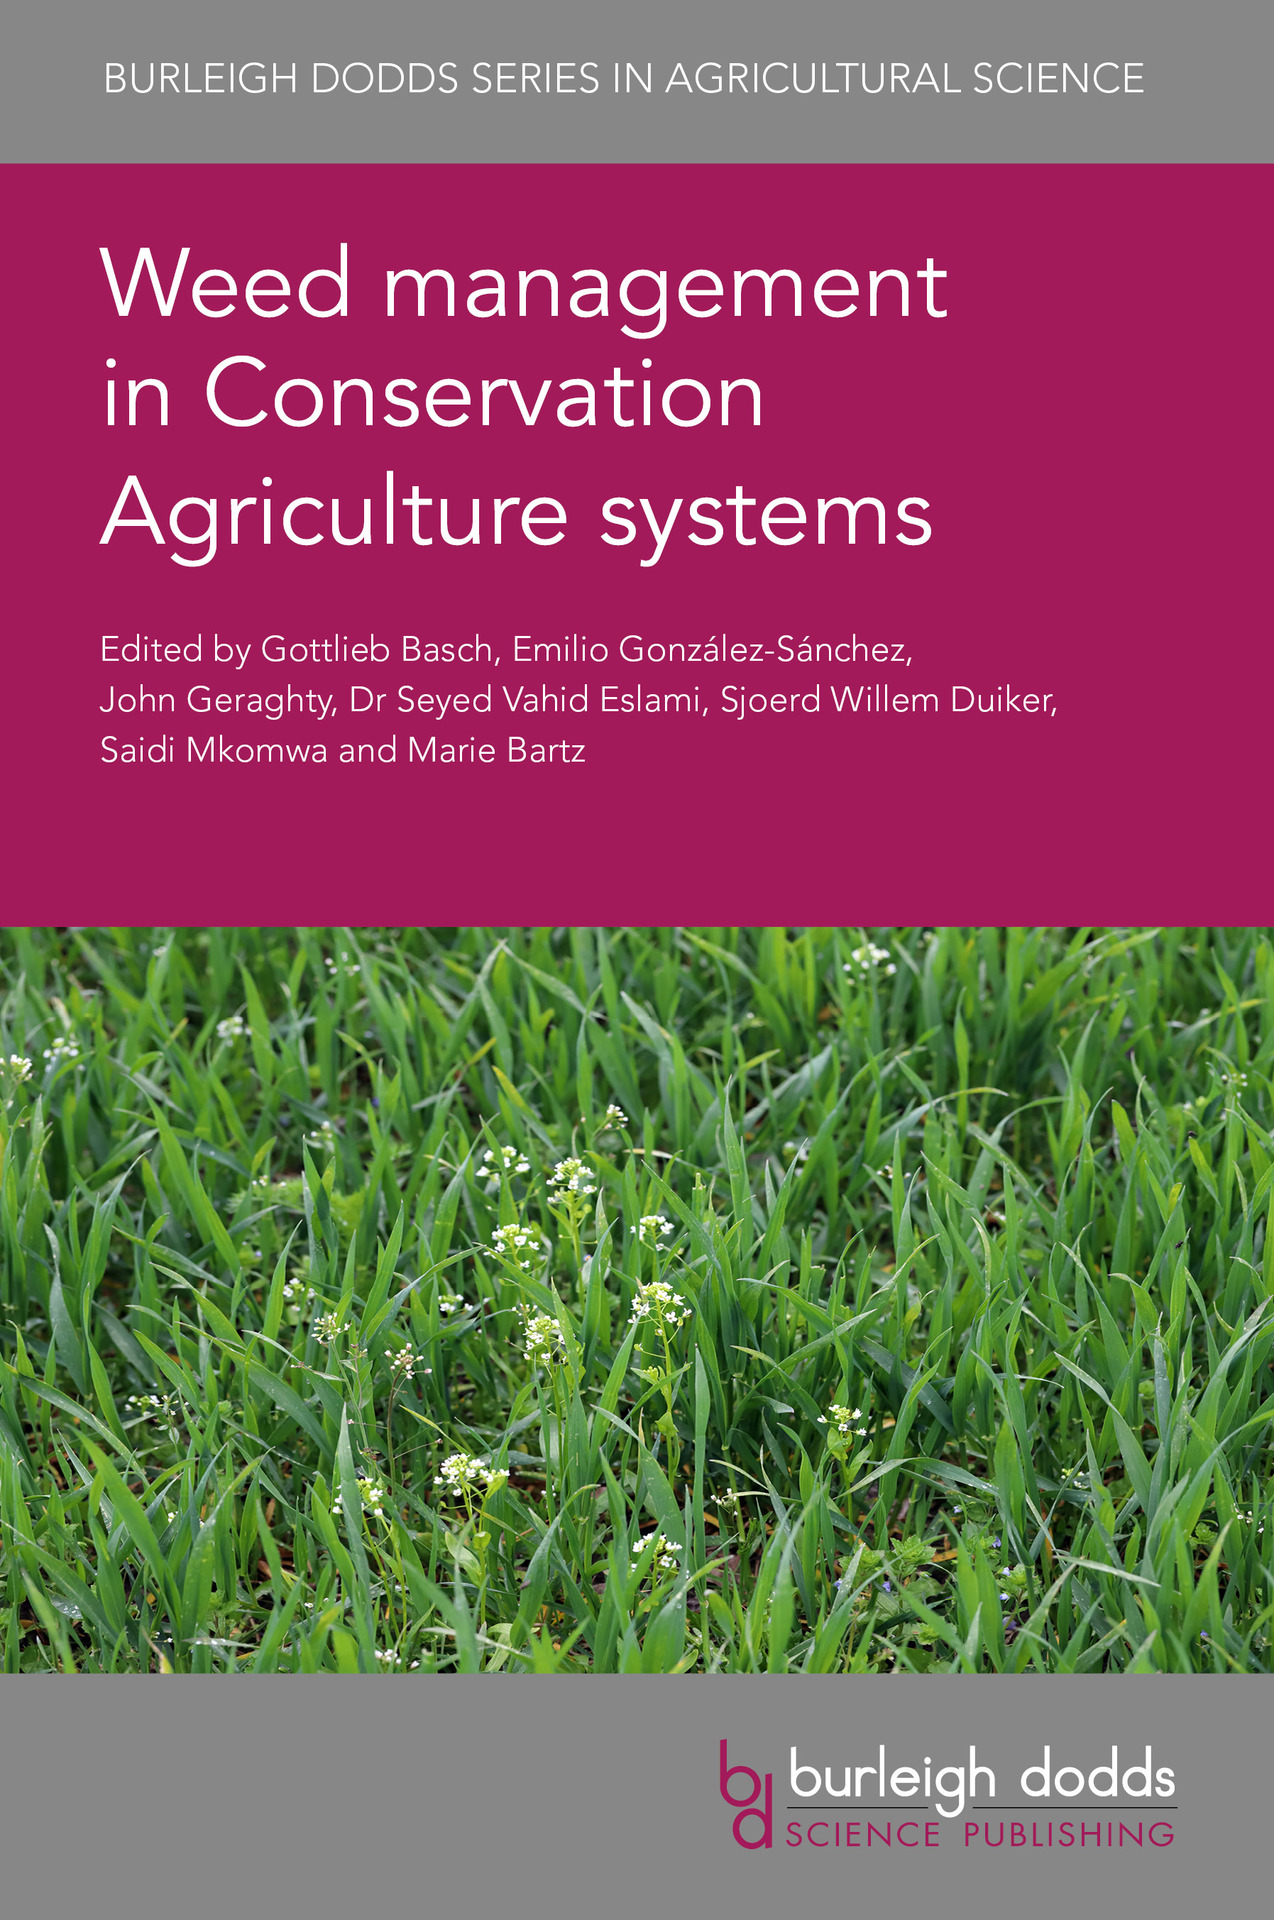 Weed management in Conservation Agriculture systems